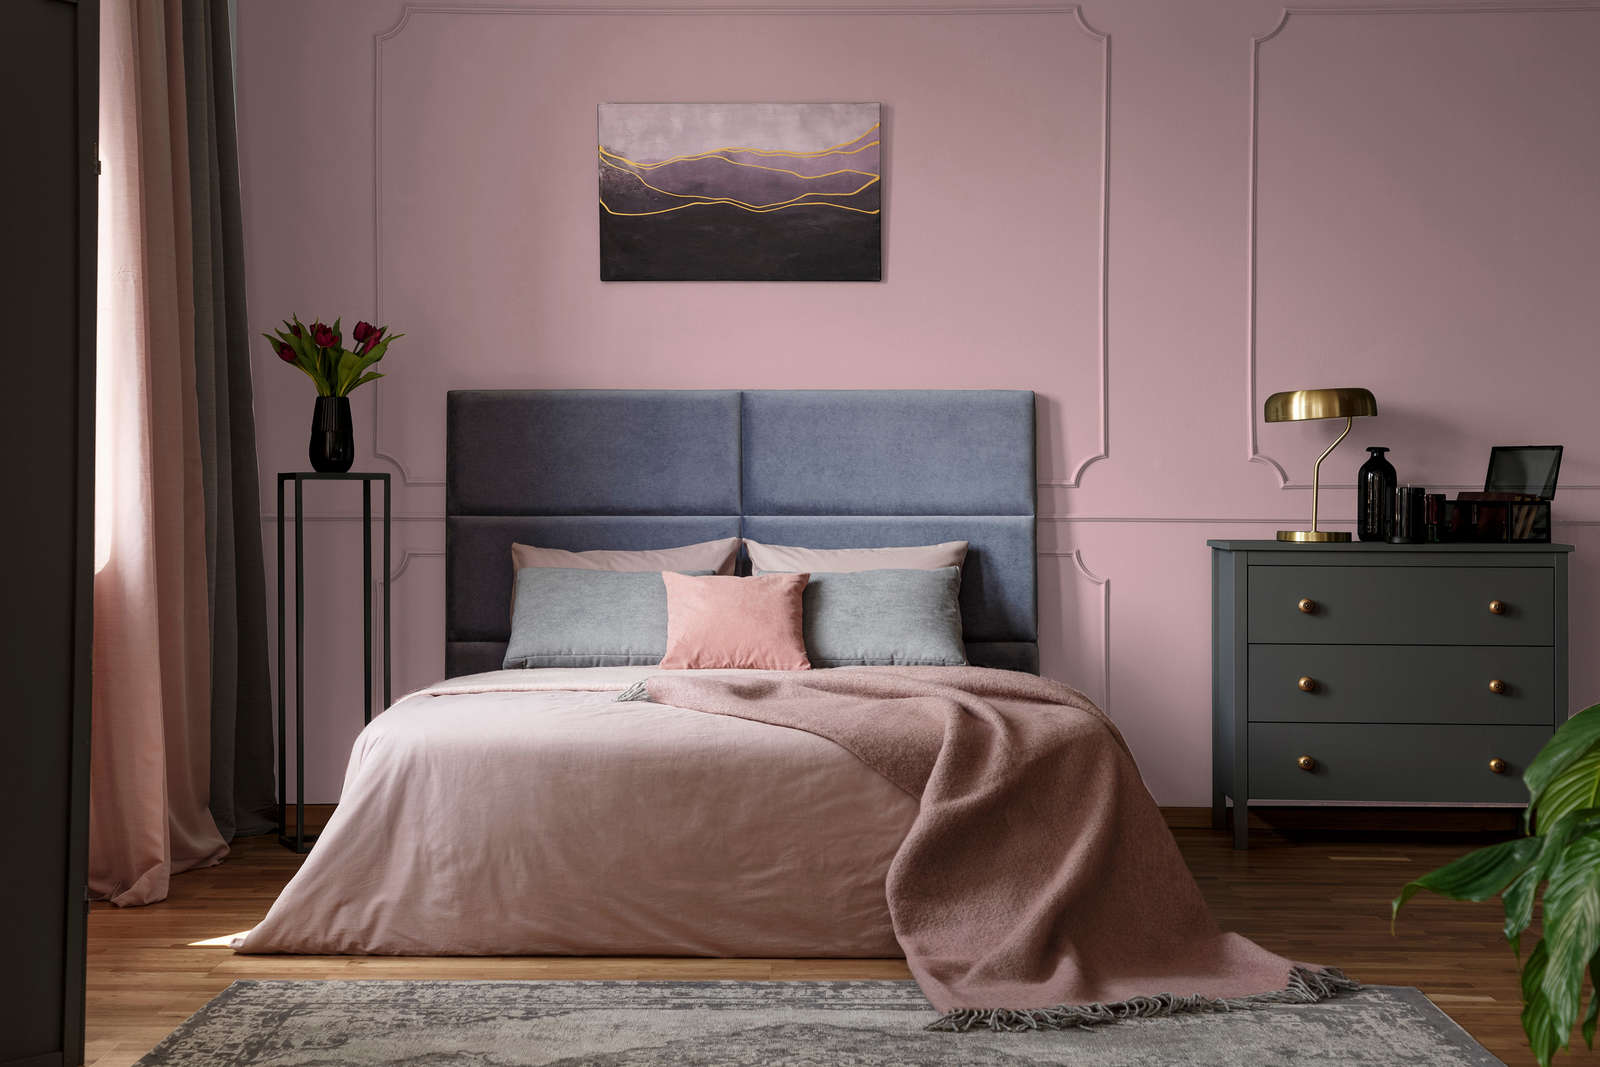             Premium Wall Paint lovely pink »Blooming Blossom« NW1016 – 5 litre
        